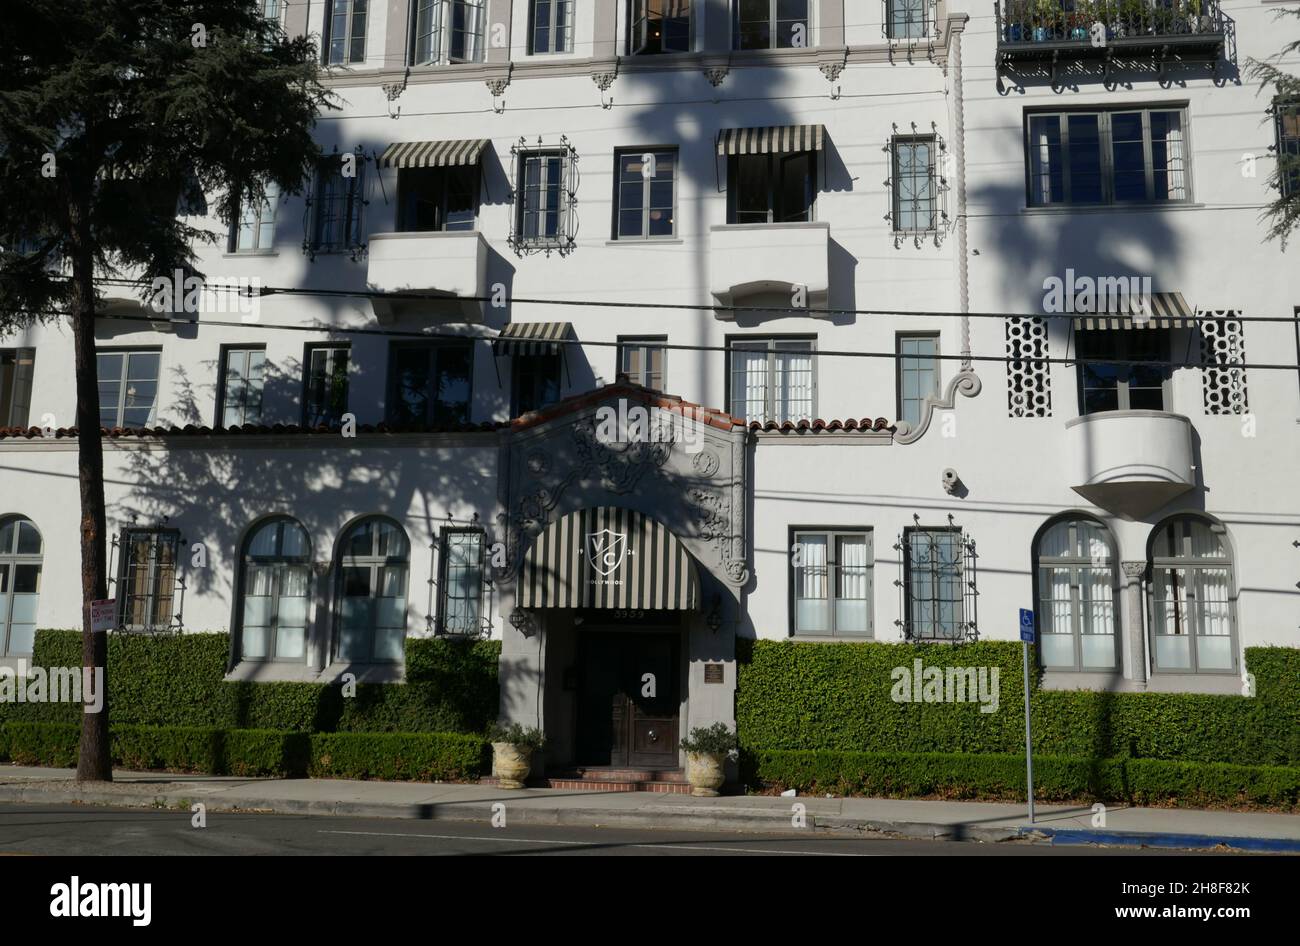 Los Angeles, California, USA 27th November 2021 A general view of atmosphere of former Home of Actress Marion Davies, Actress Bette Davis, Director George Cukor, Actor Adolphe Menjou, Actress Ona Munson, Producer David Selznick and Louella Parsons at 5959 Franklin Avenue on November 27, 2021 in Los Angeles, California, USA. Photo by Barry King/Alamy Stock Photo Stock Photo